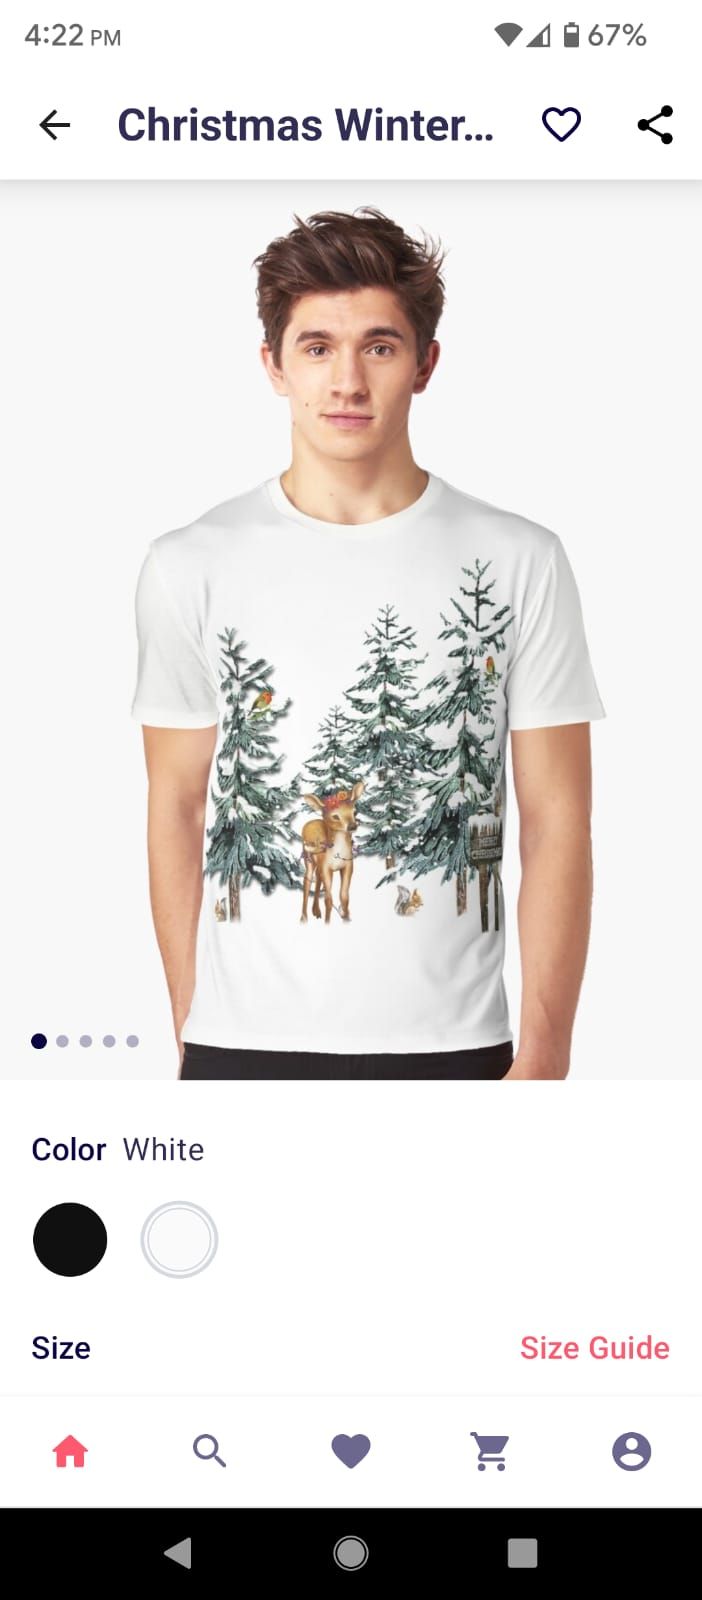 Redbubble - Editing Different Aspects of the Shirt